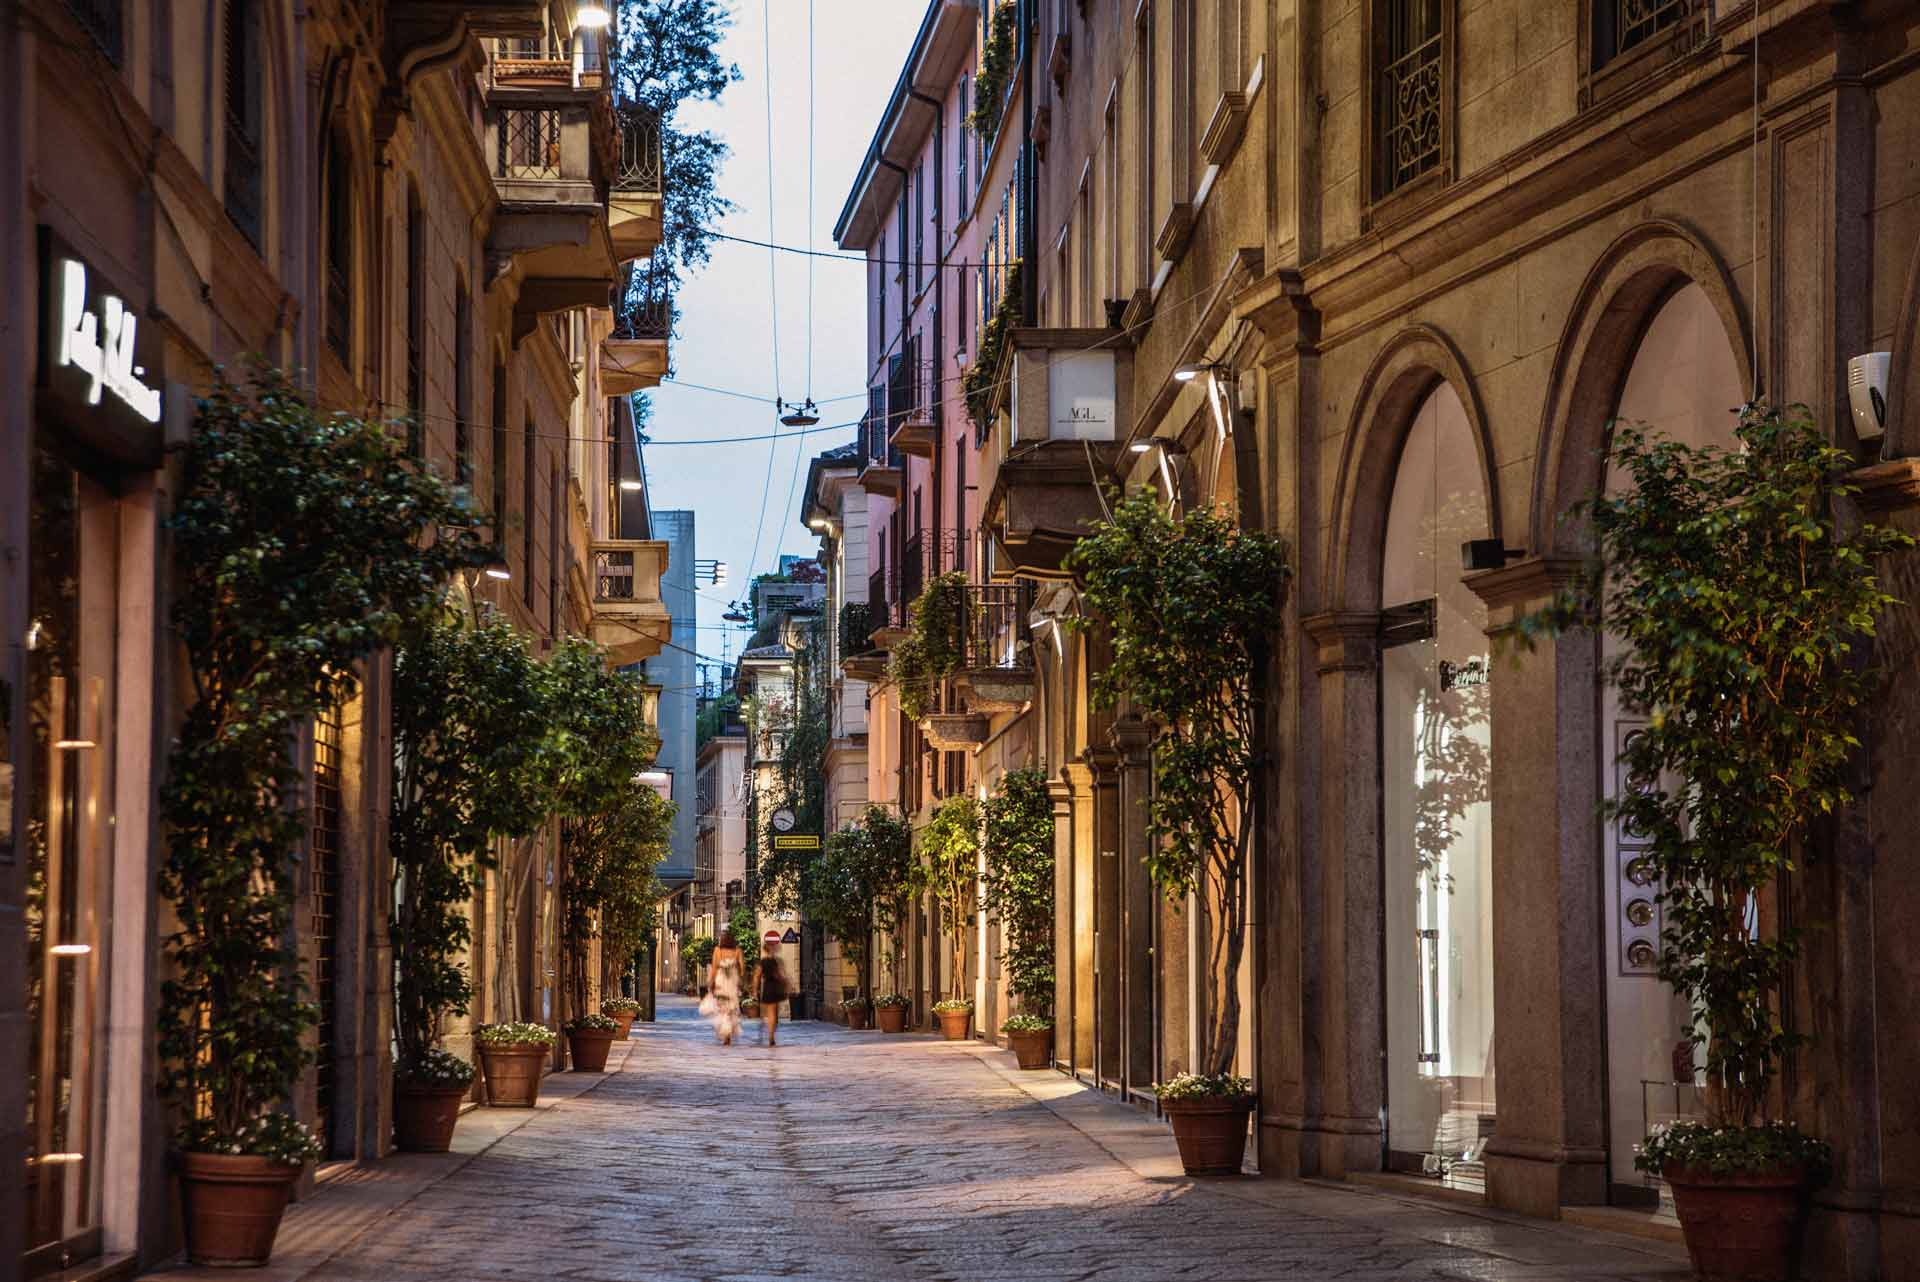 Image of Brera, a district of Milano with cobblestone streets and historic buildings